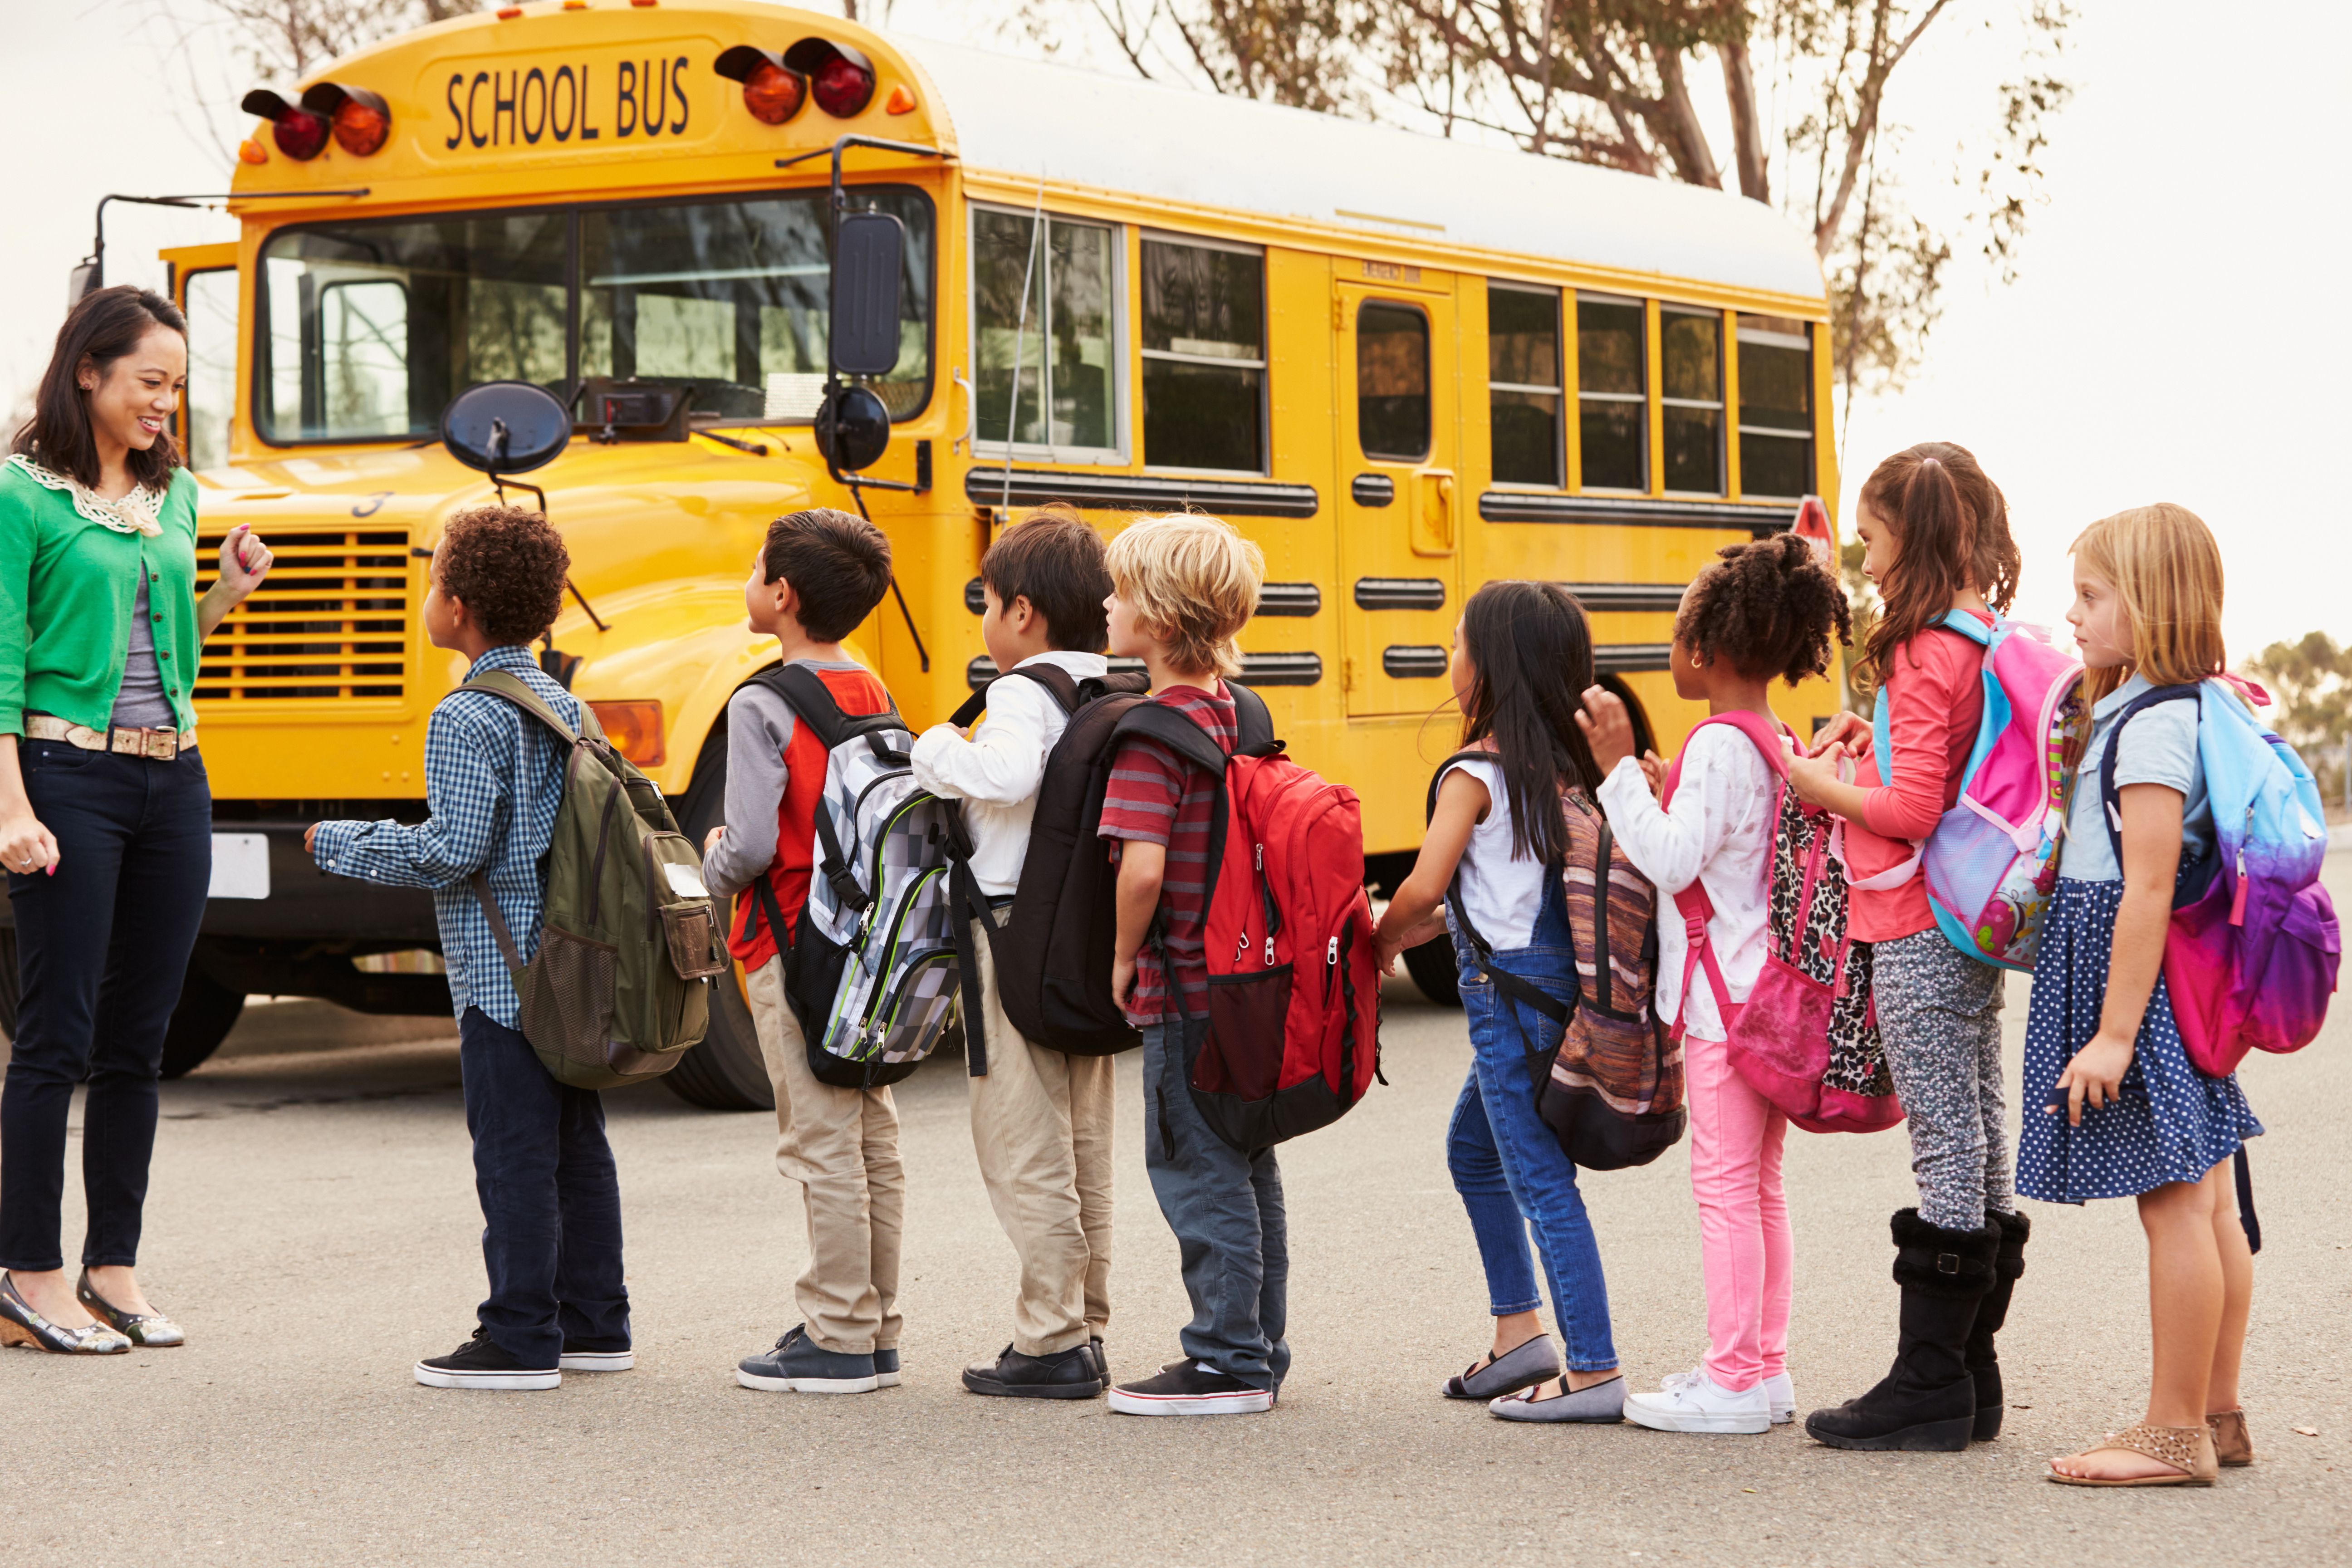 Children lining up for the school bus. | Source: Shutterstock